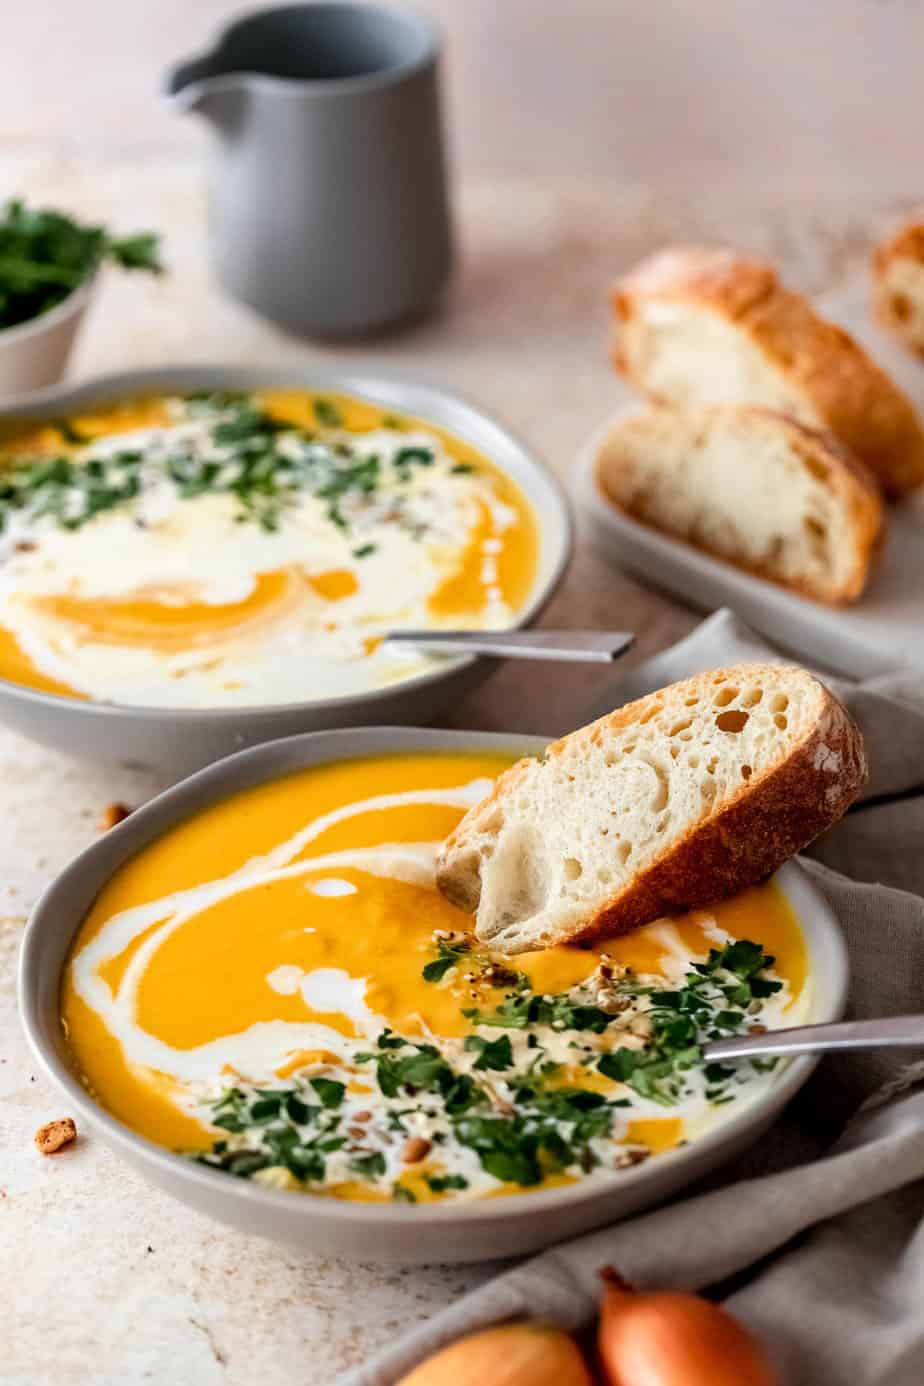 A bowl of soup served with fresh bread and garnished with cream and herbs.